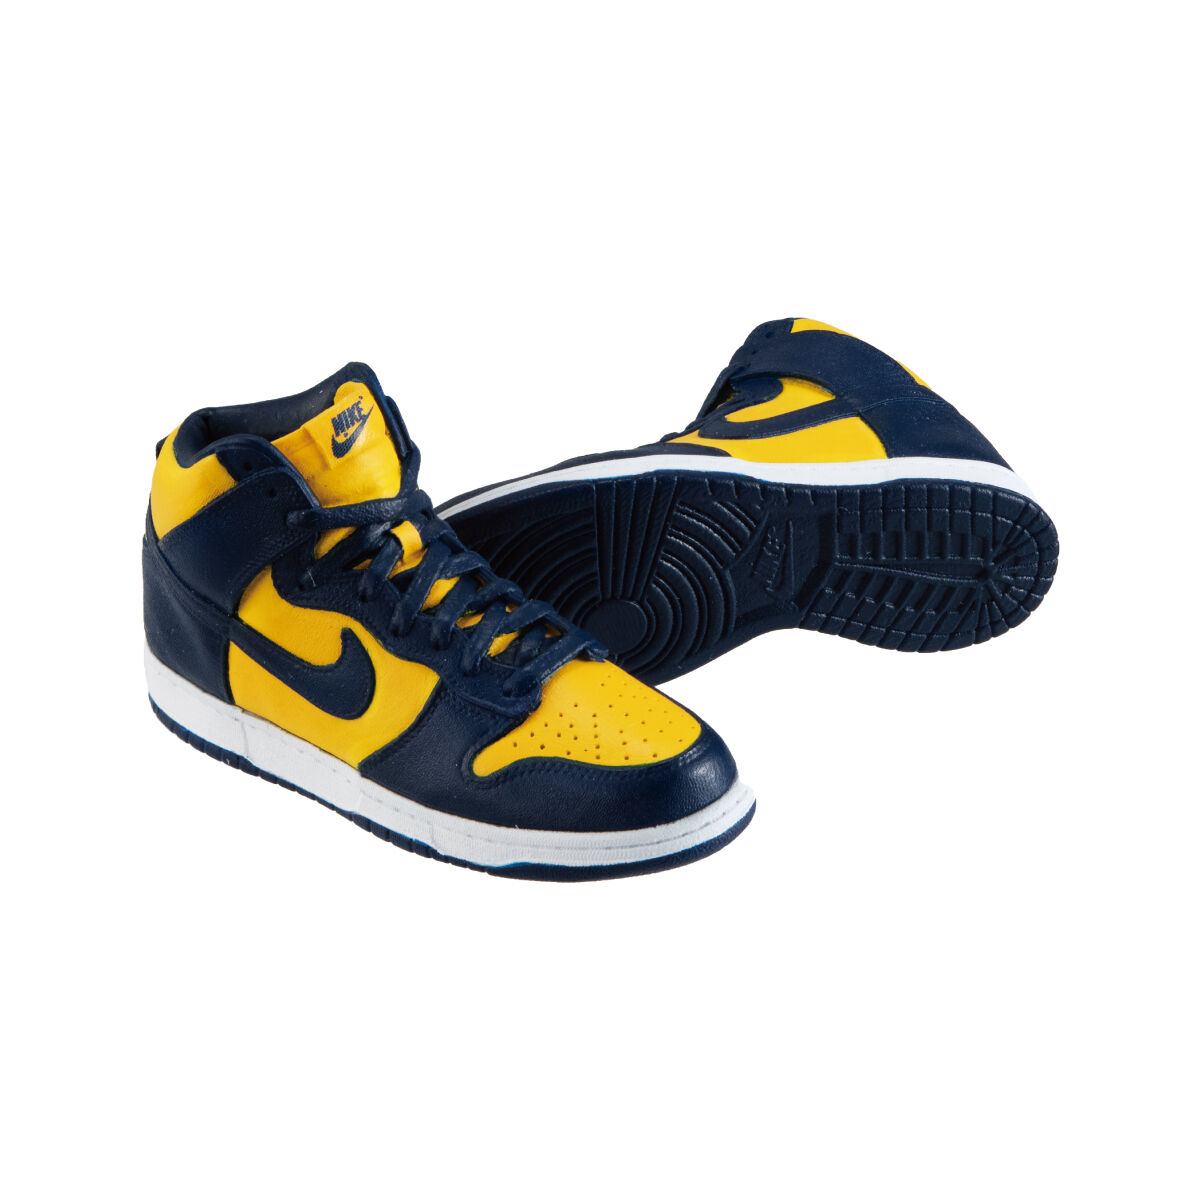 NIKE DUNK HIGH miniature collection | 趣味・コレクション | バンダイナムコグループ公式通販サイト